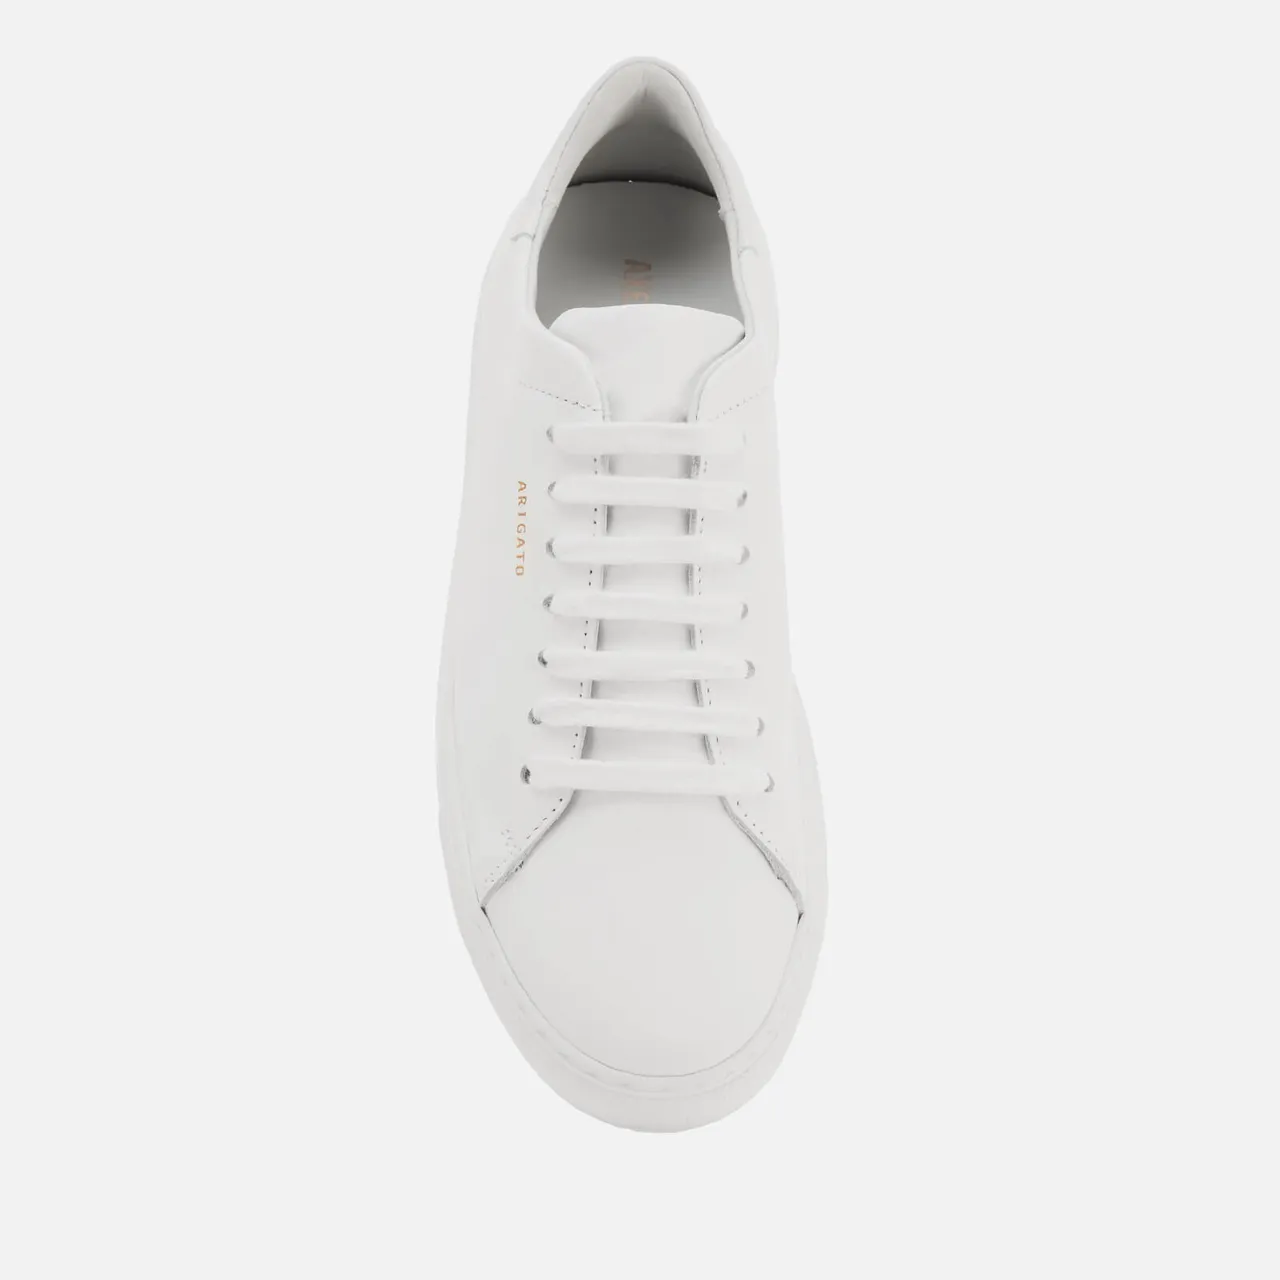 Axel Arigato Women's Clean 90 Leather Cupsole Trainers - White - UK